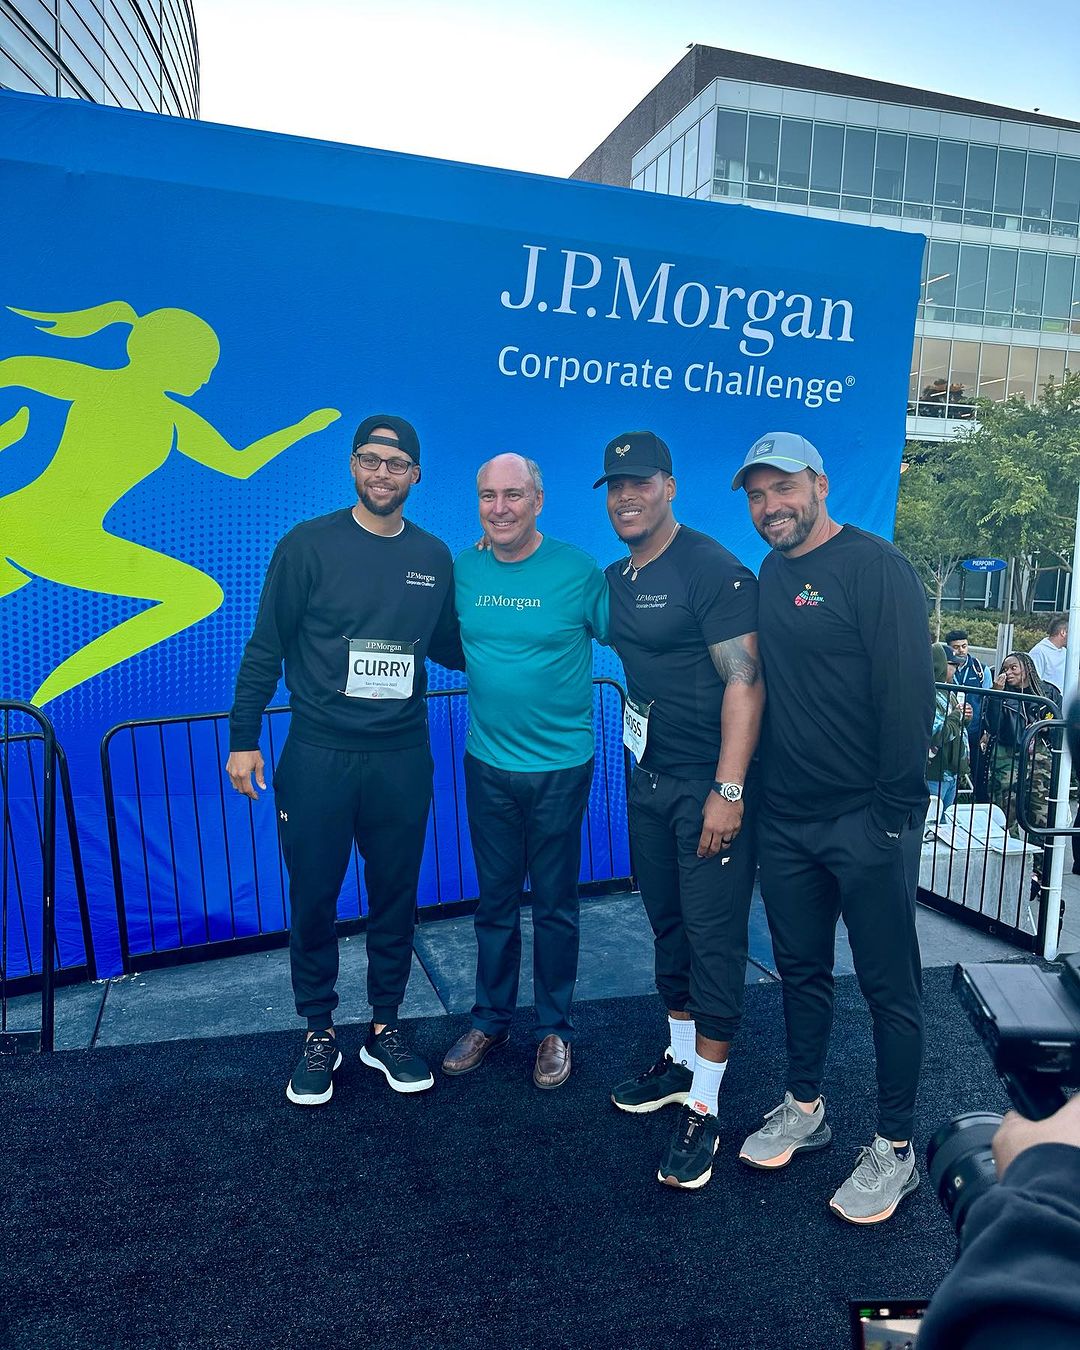 Stephen Curry in Year 37 in San Francisco of the @jpmorgan Corporate Challenge